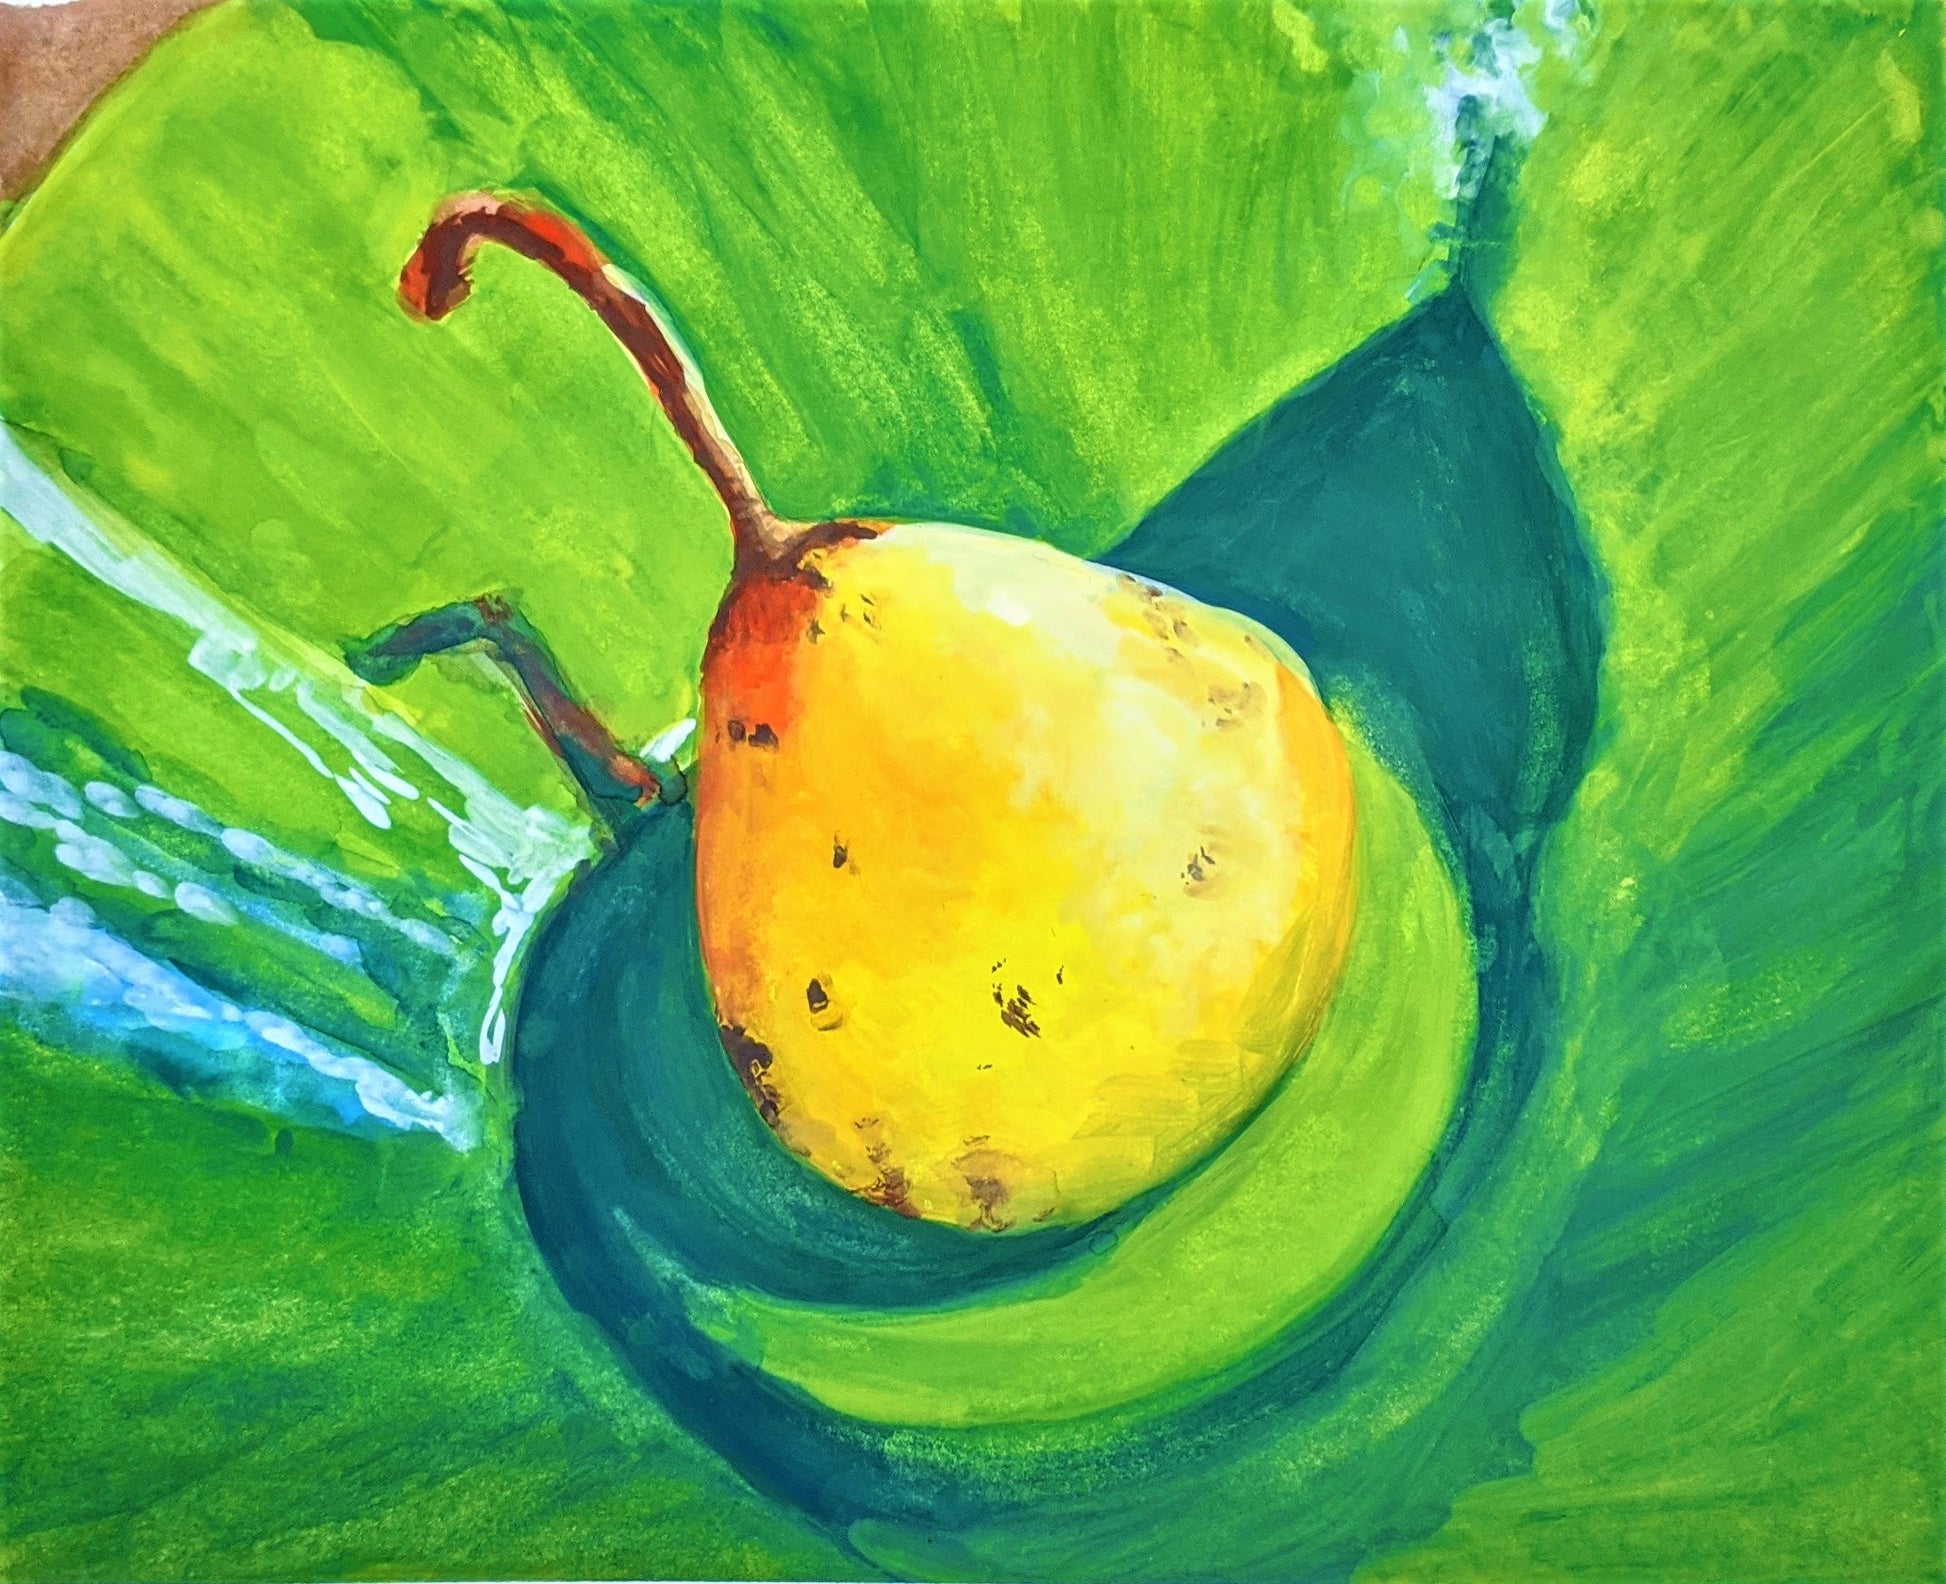 Pear and shadows gouche painting